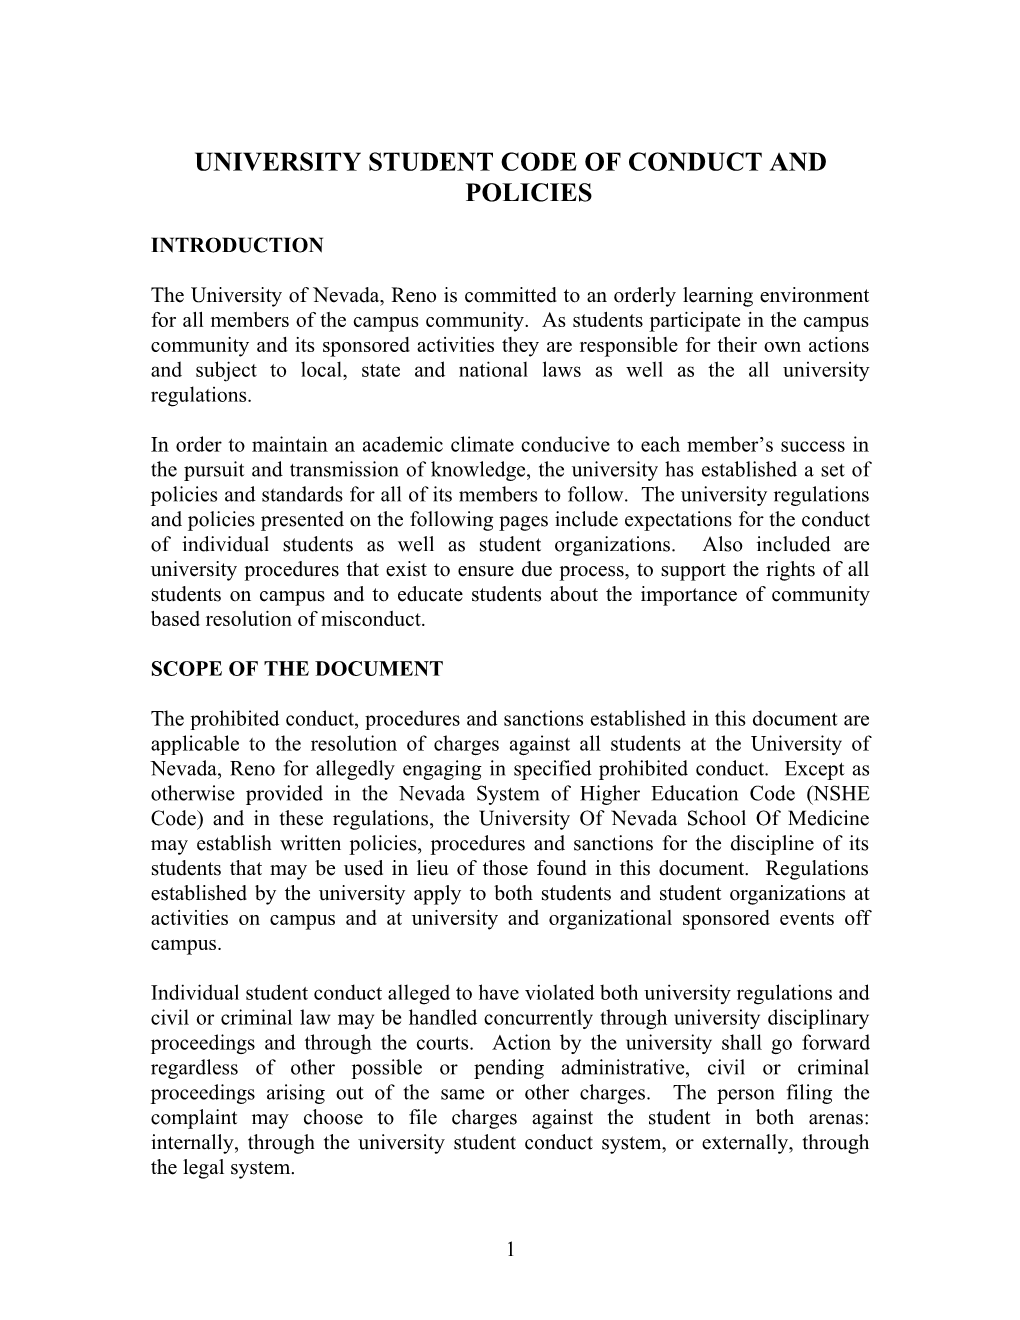 University Guidelines and Regulations